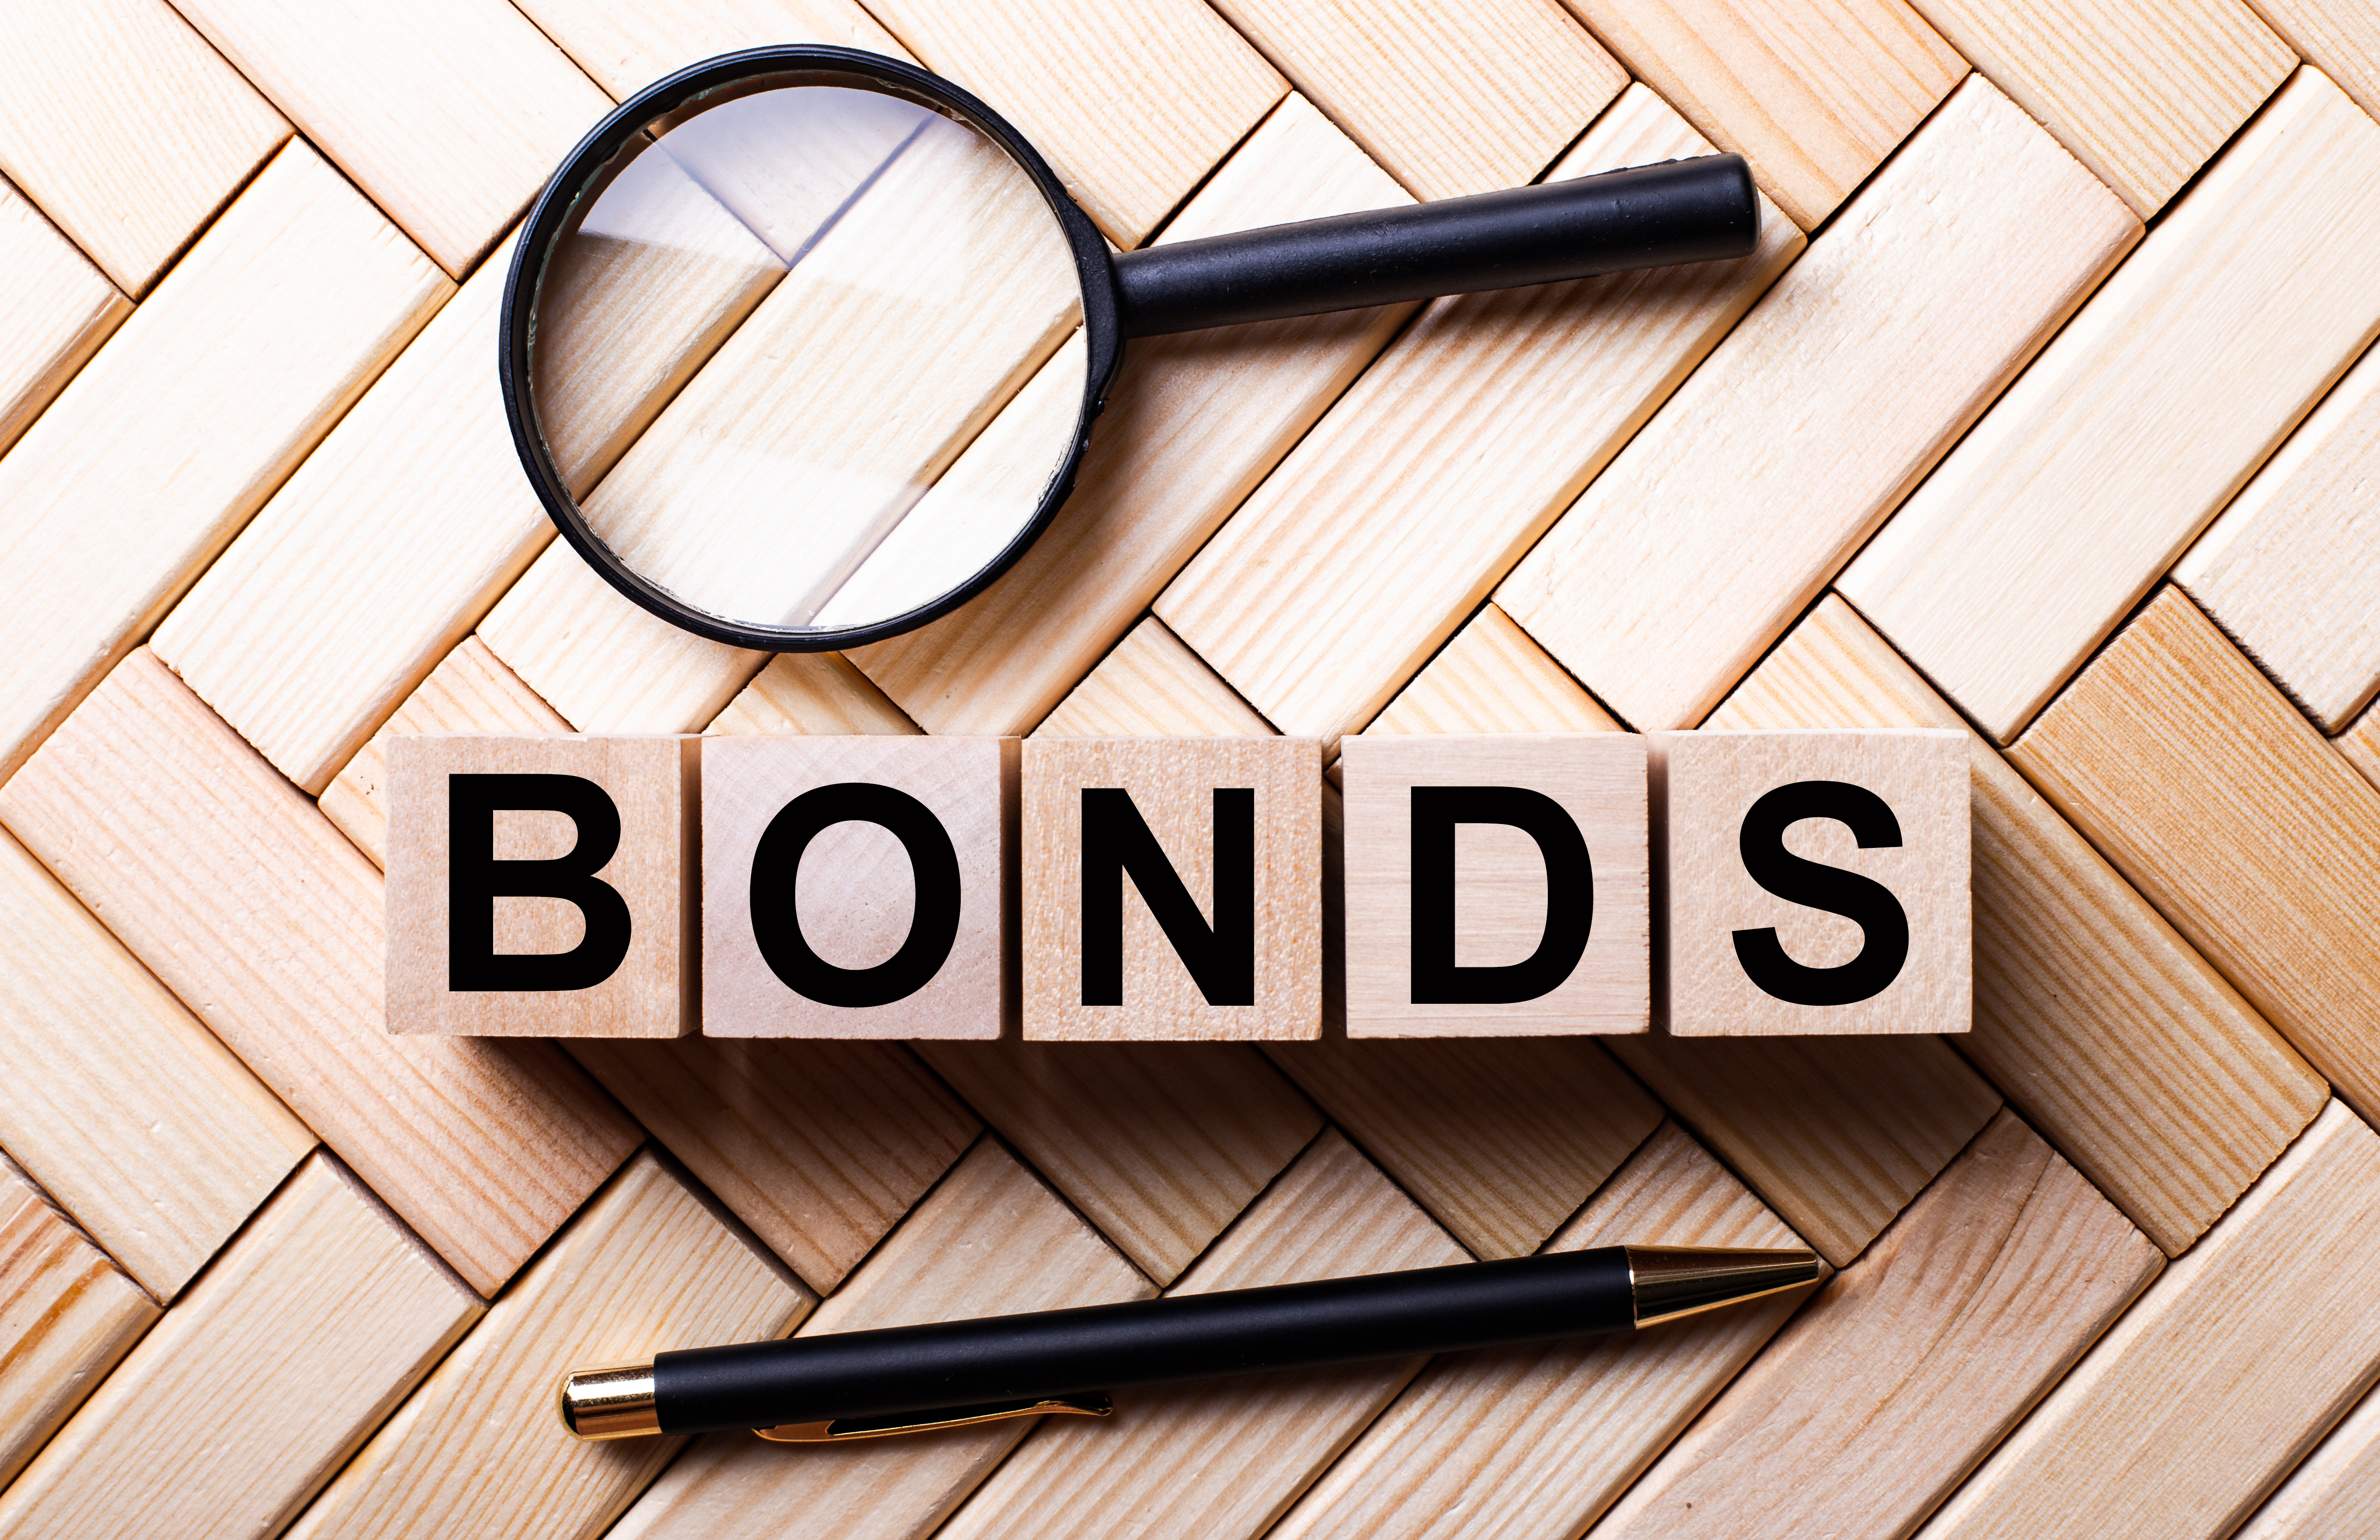 Considerations For Investing in Bonds